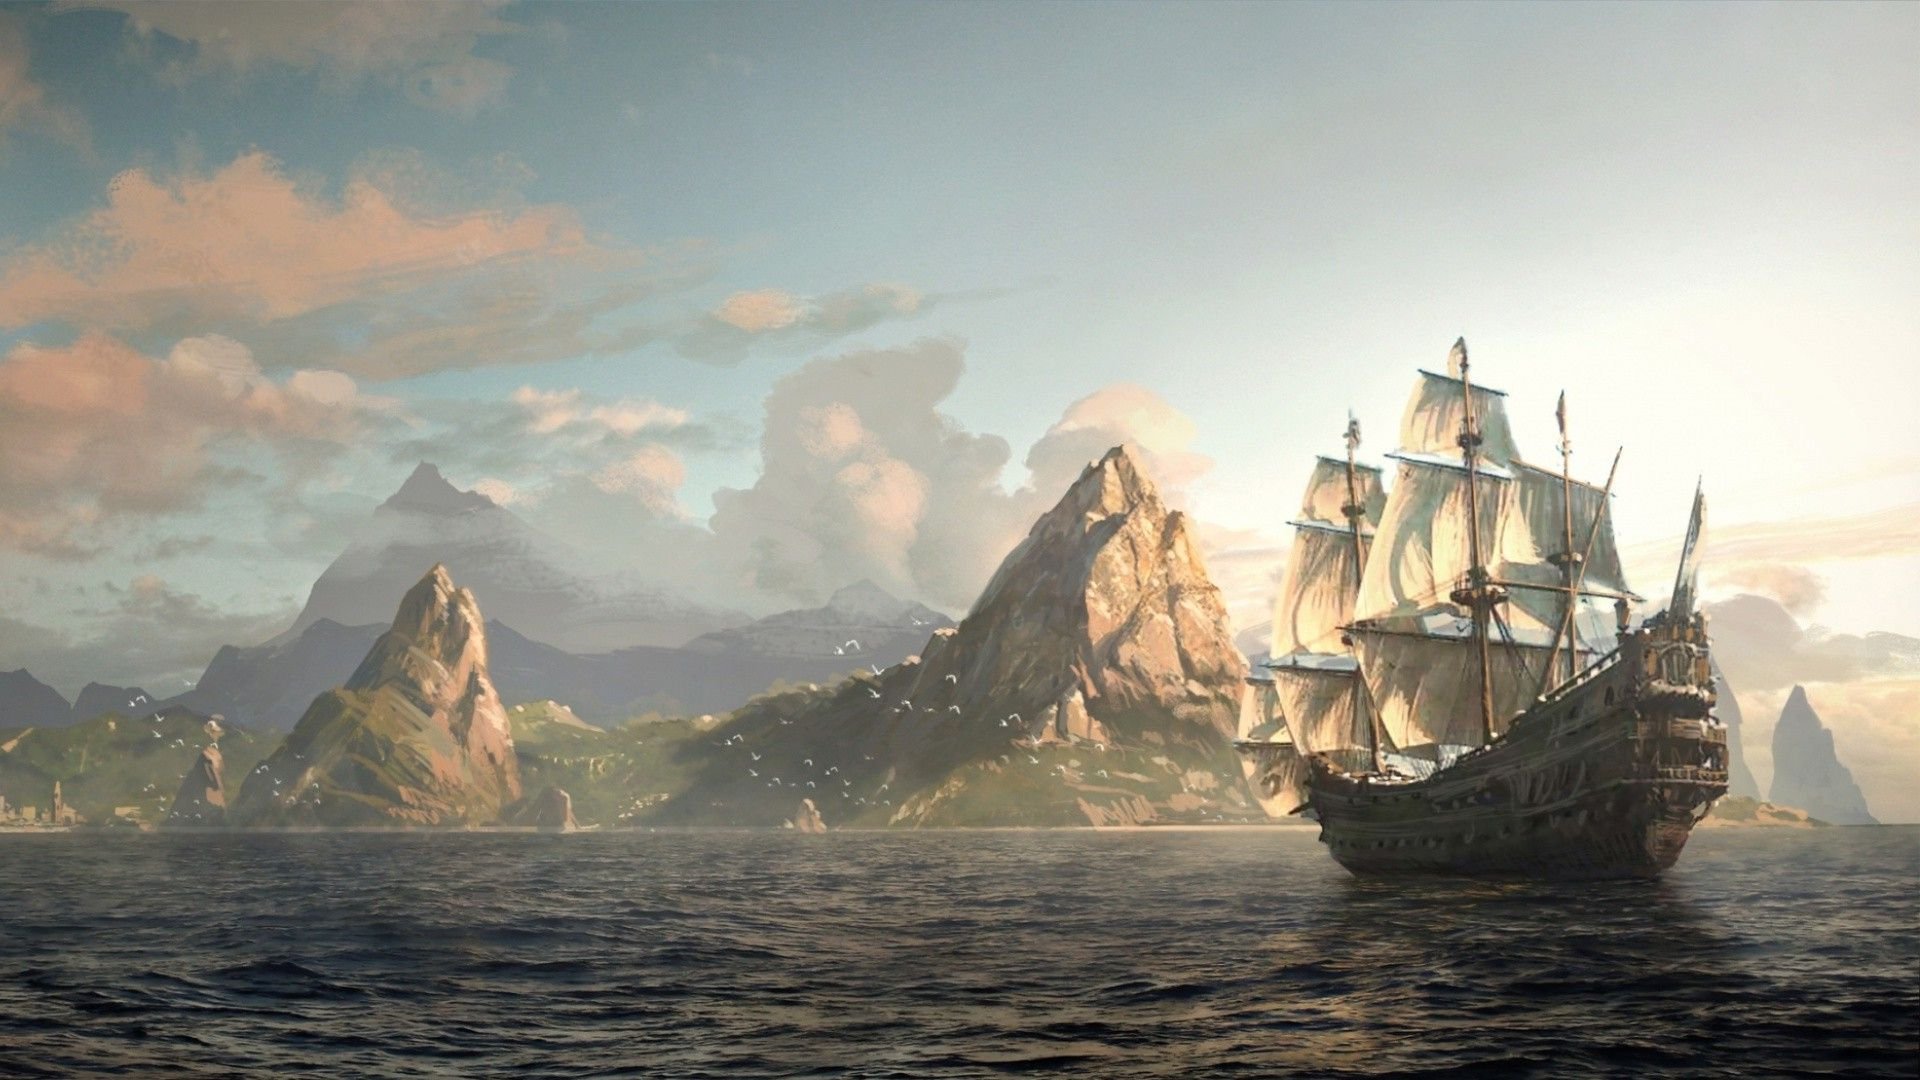 3840x2160 / 3840x2160 pirate ship 4k wallpaper of windows -  Coolwallpapers.me!